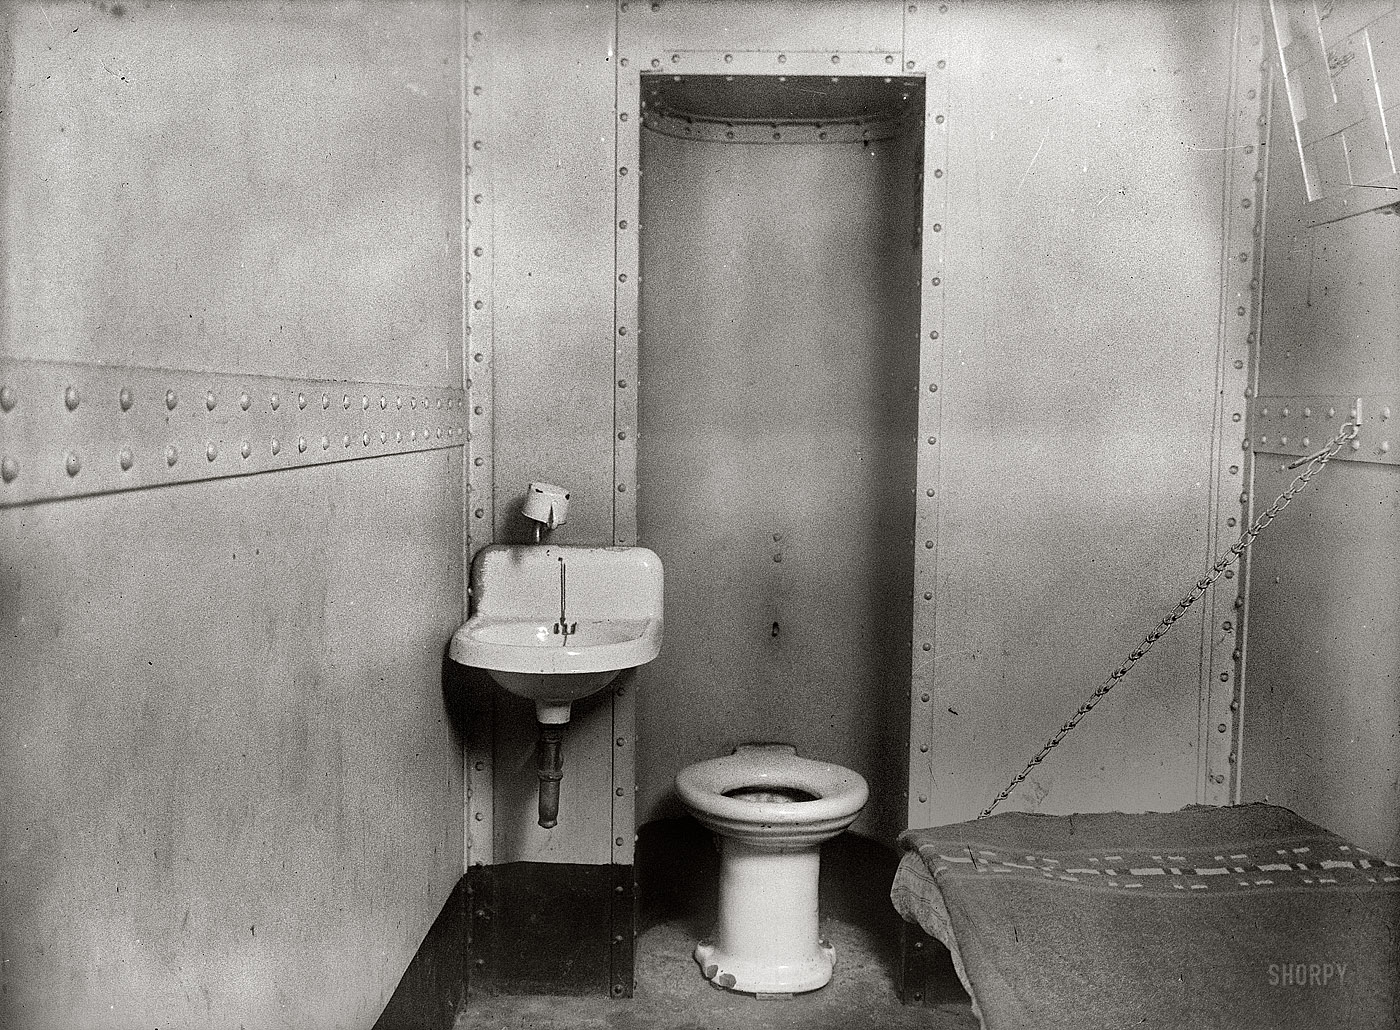 1919. "District of Columbia Jail." Harris & Ewing glass negative. View full size.